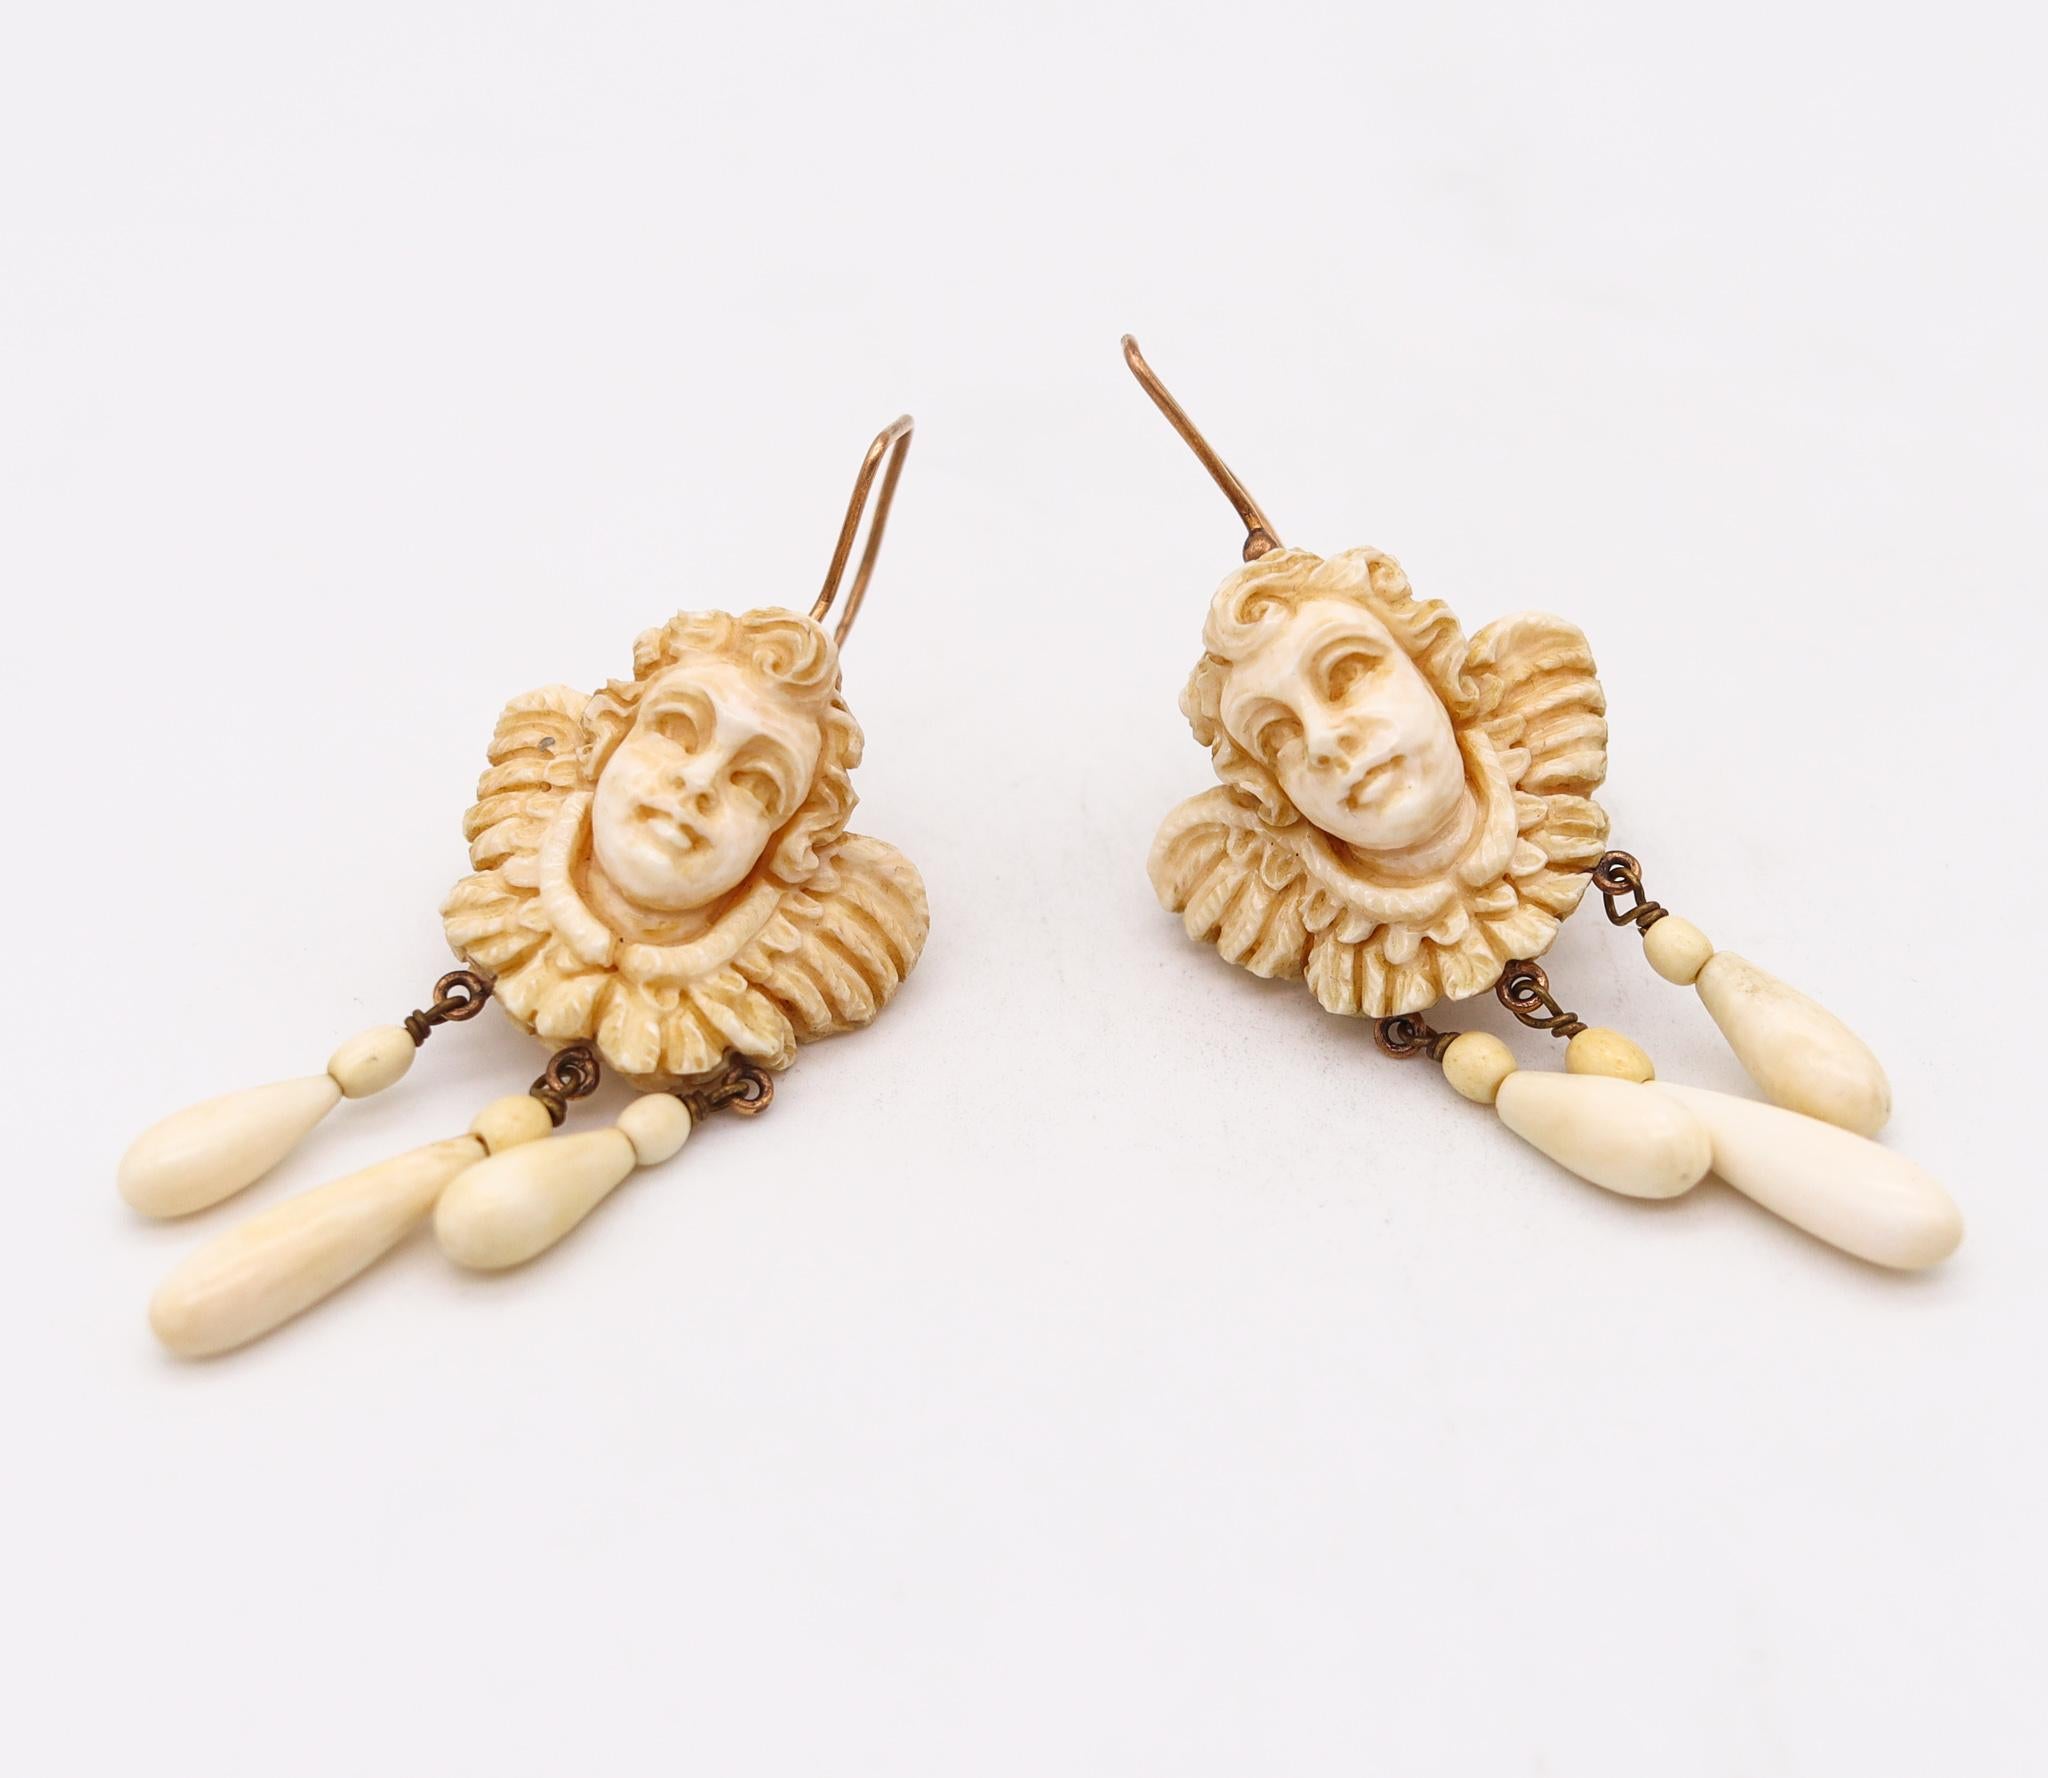 Women's French 1820 Pair of Dangle Drop Earrings in 18Kt Gold with Cherubs Carvings For Sale